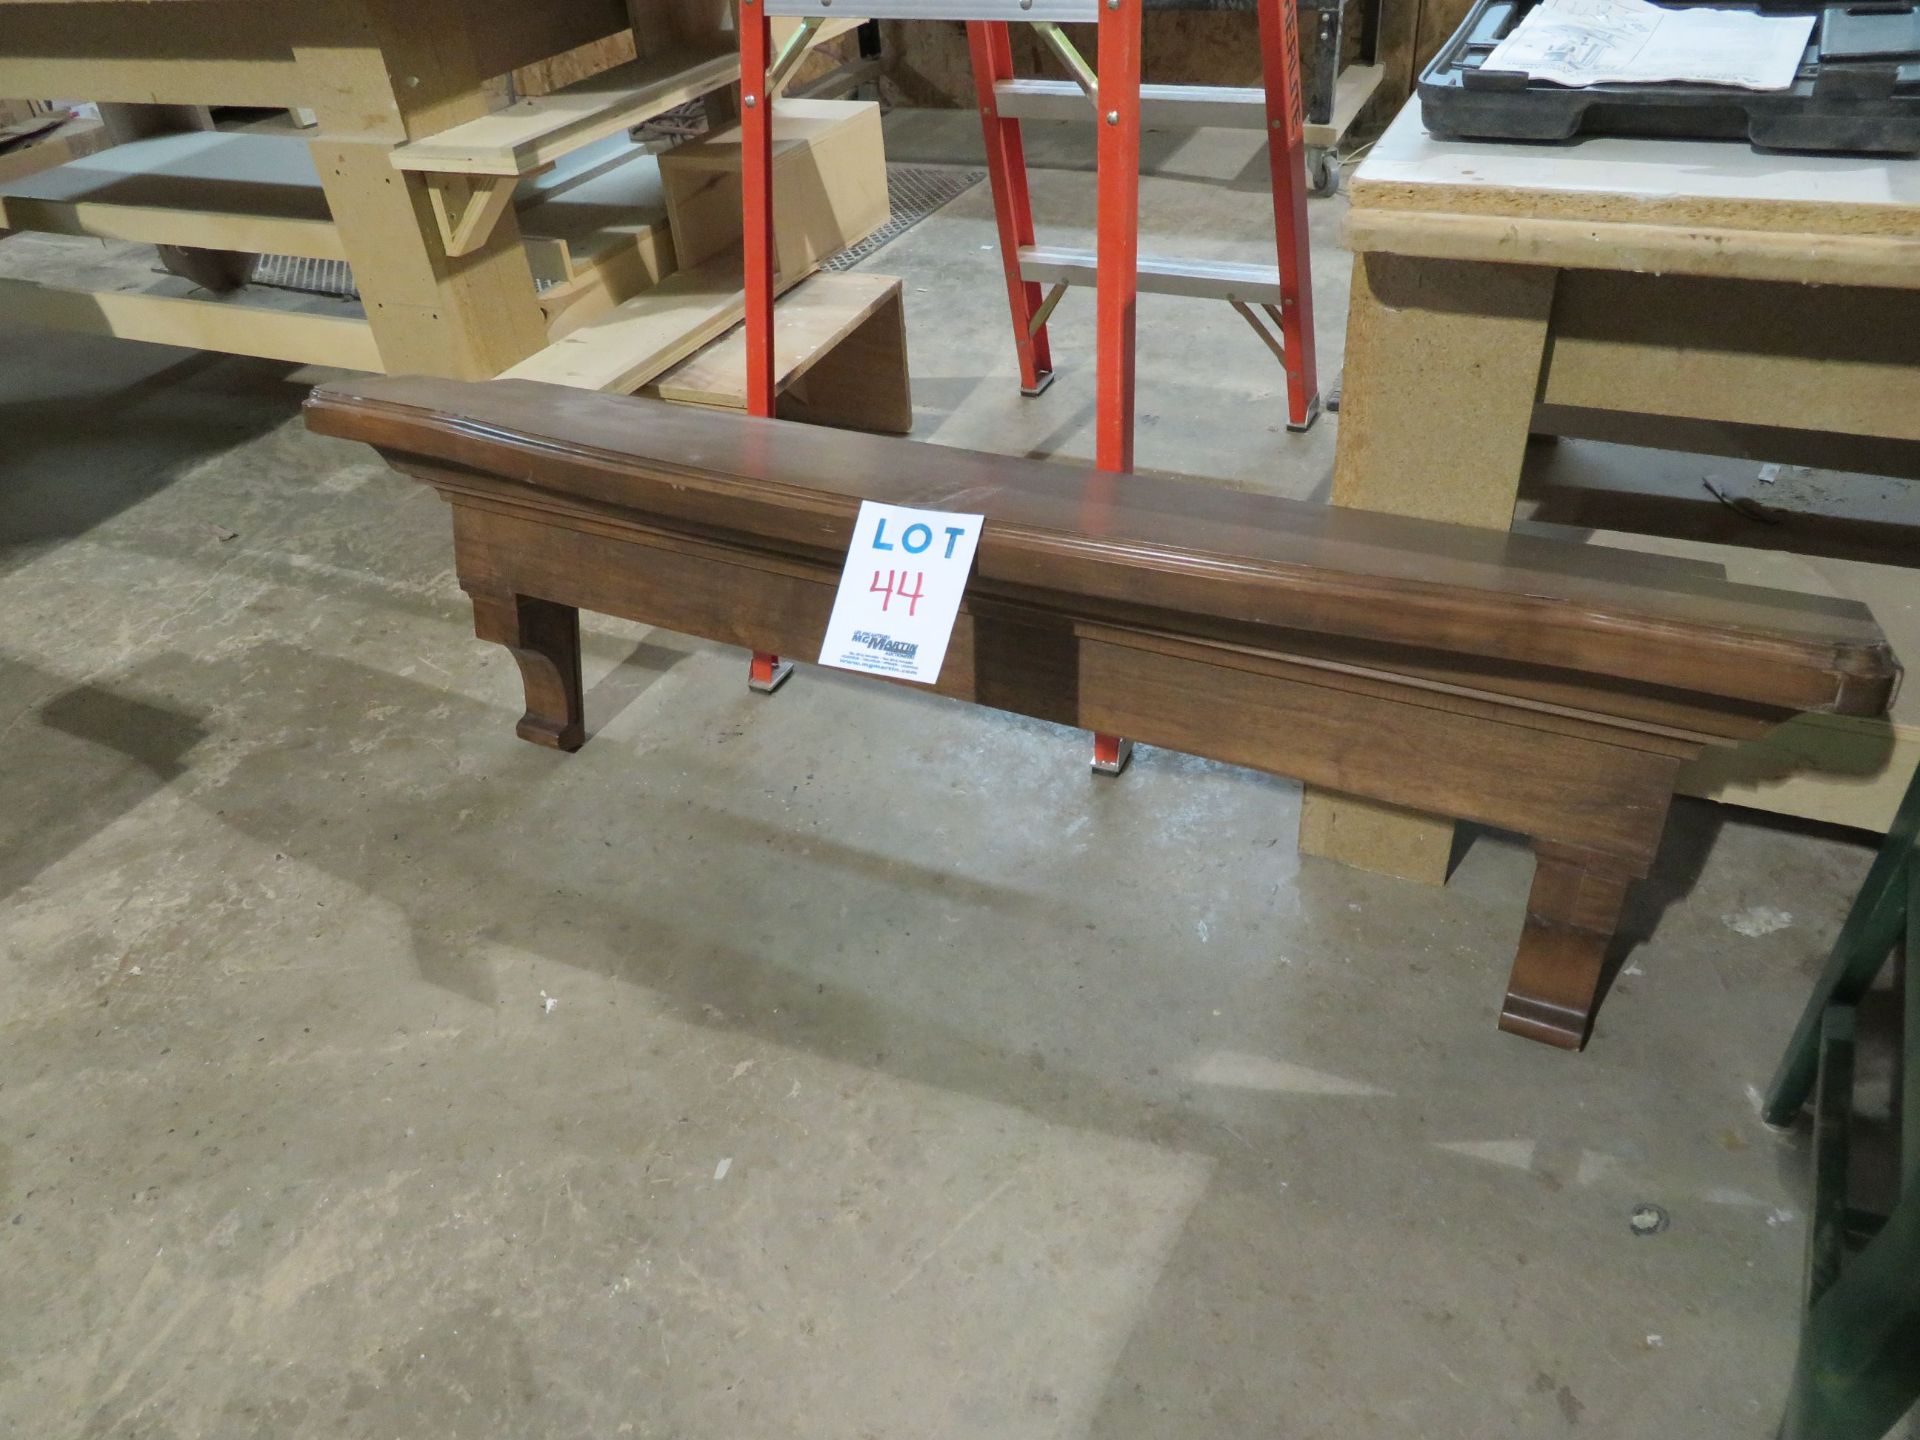 LOT including decorative wood chairs (qty 4) and wood fire mantle approx. 58"x 11"d - Image 2 of 2